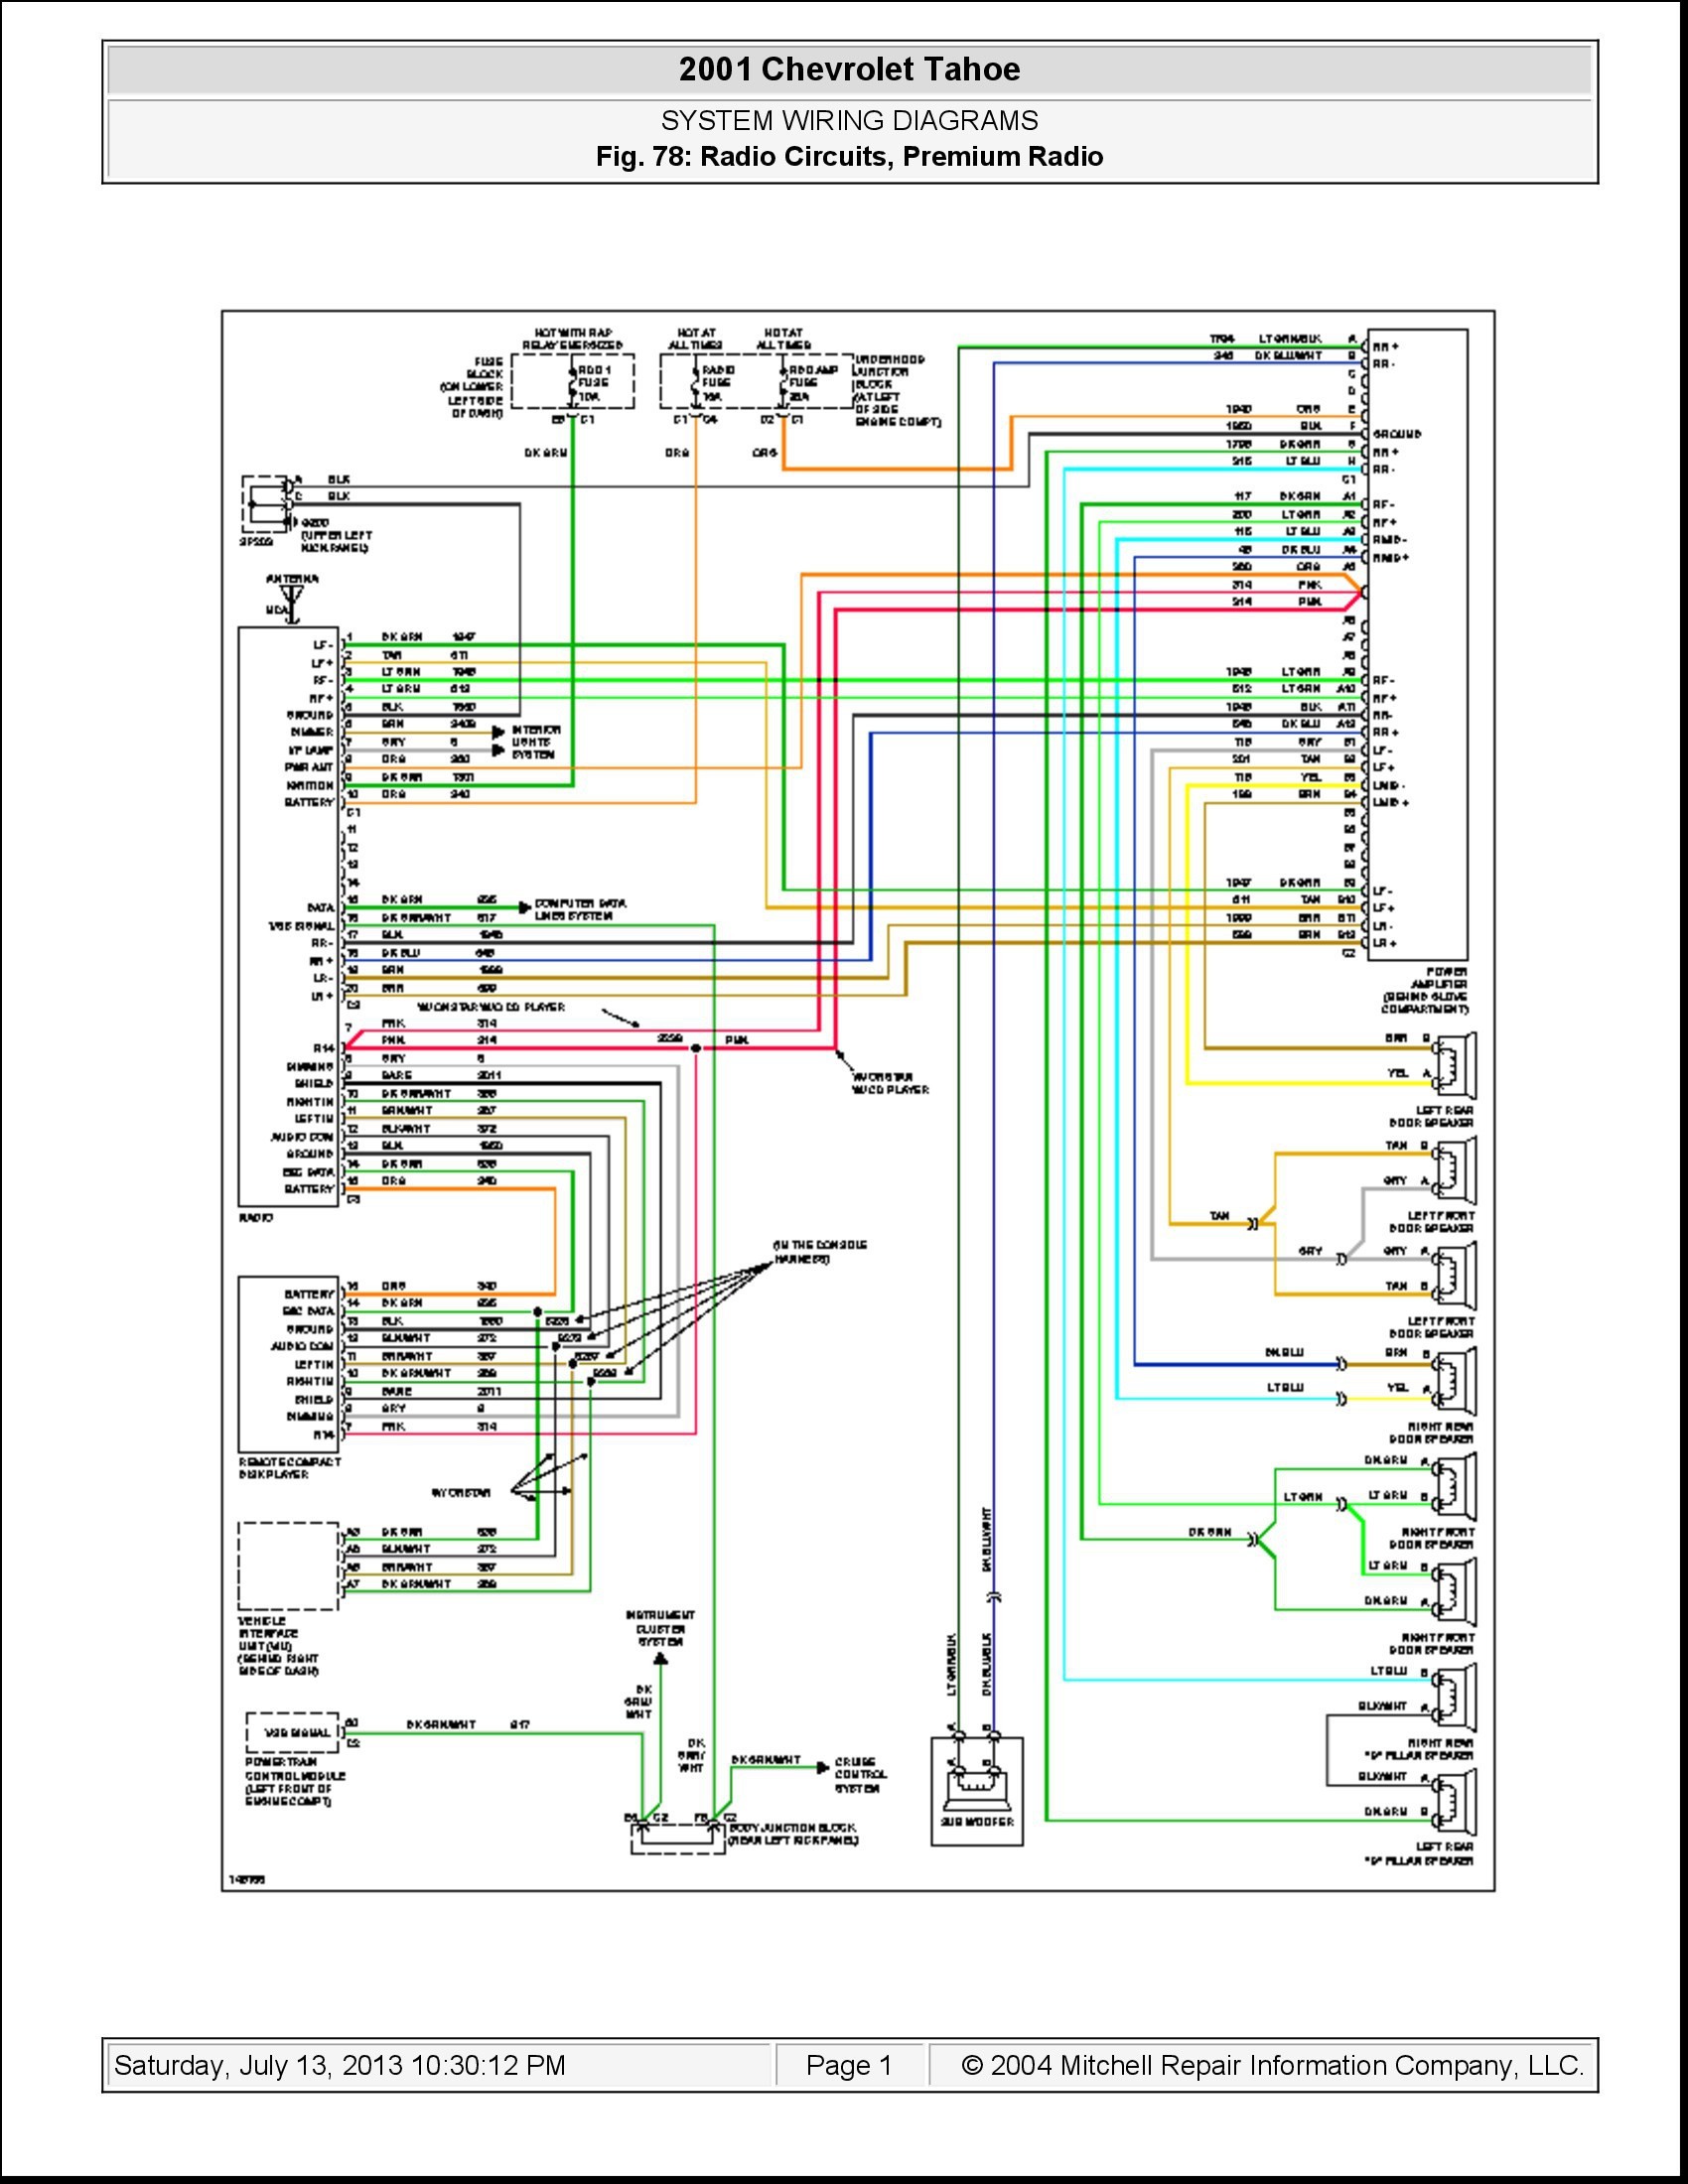 2005 Chevy Equinox Wiring Diagram Wiring Diagram for Chevy Impala 2006 Schematics Wiring Diagrams • Of 2005 Chevy Equinox Wiring Diagram